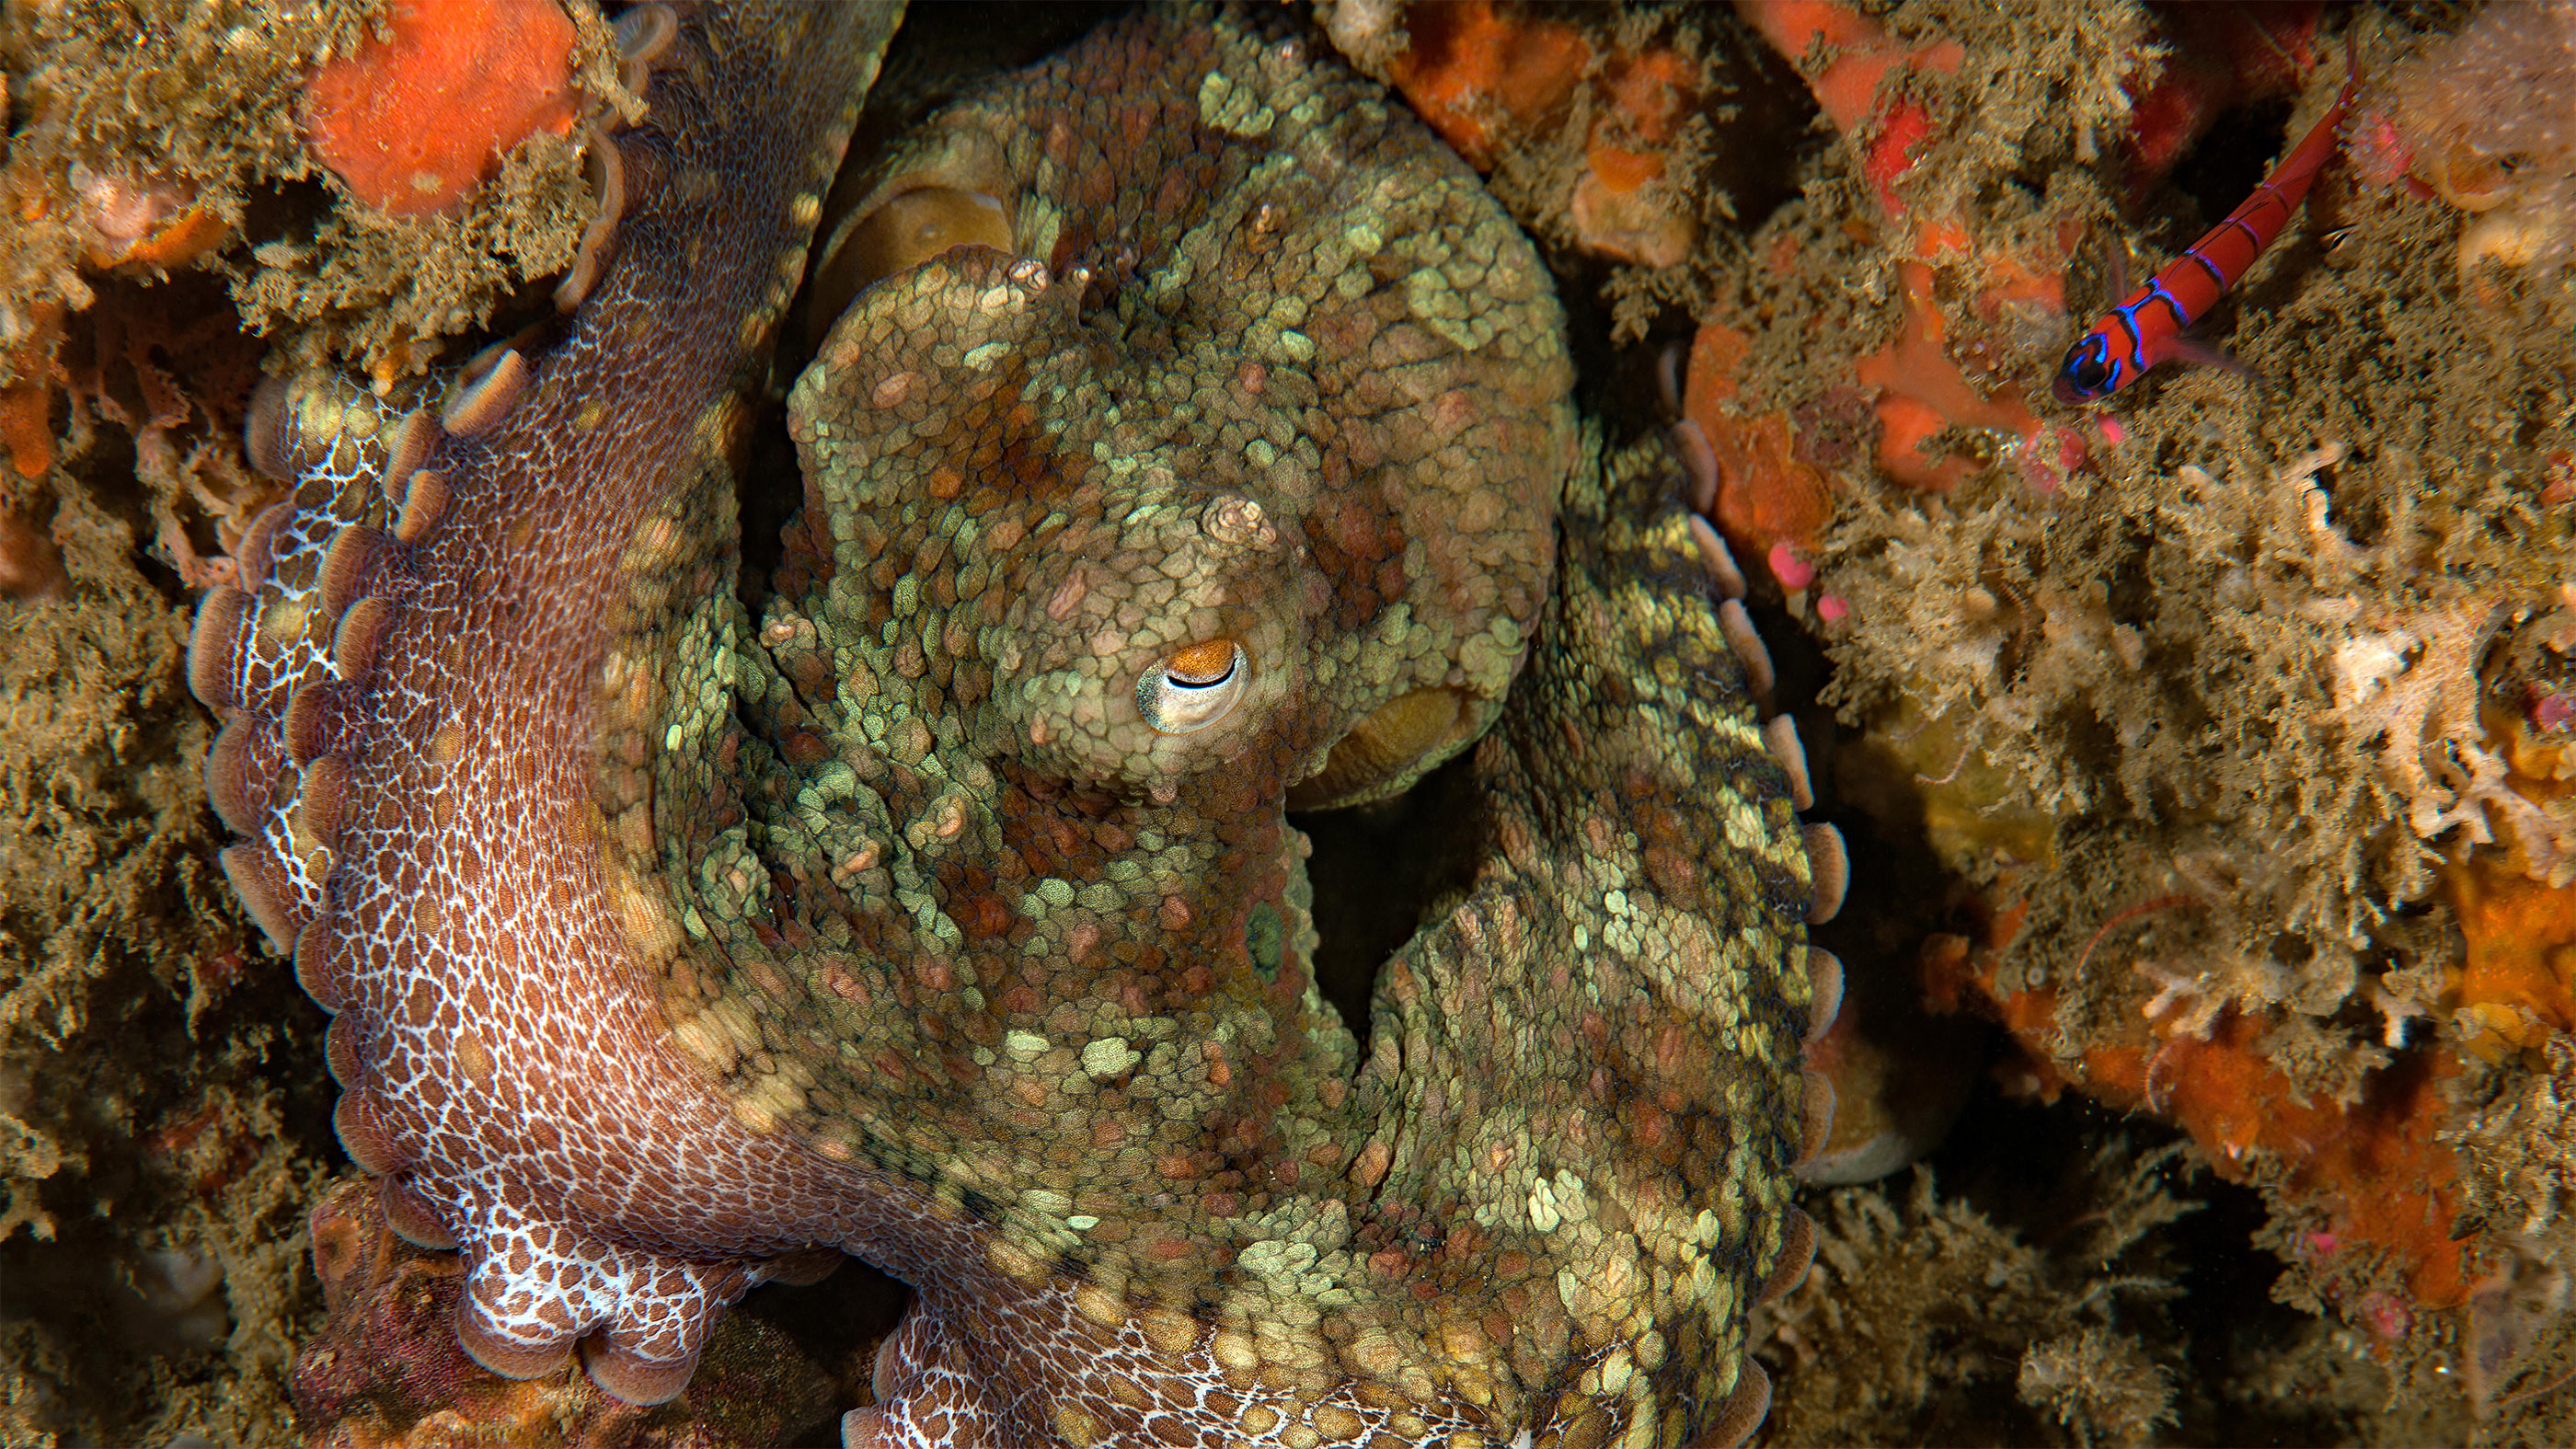 This California two-spotted octopus lays its eggs - balloon-like bags.